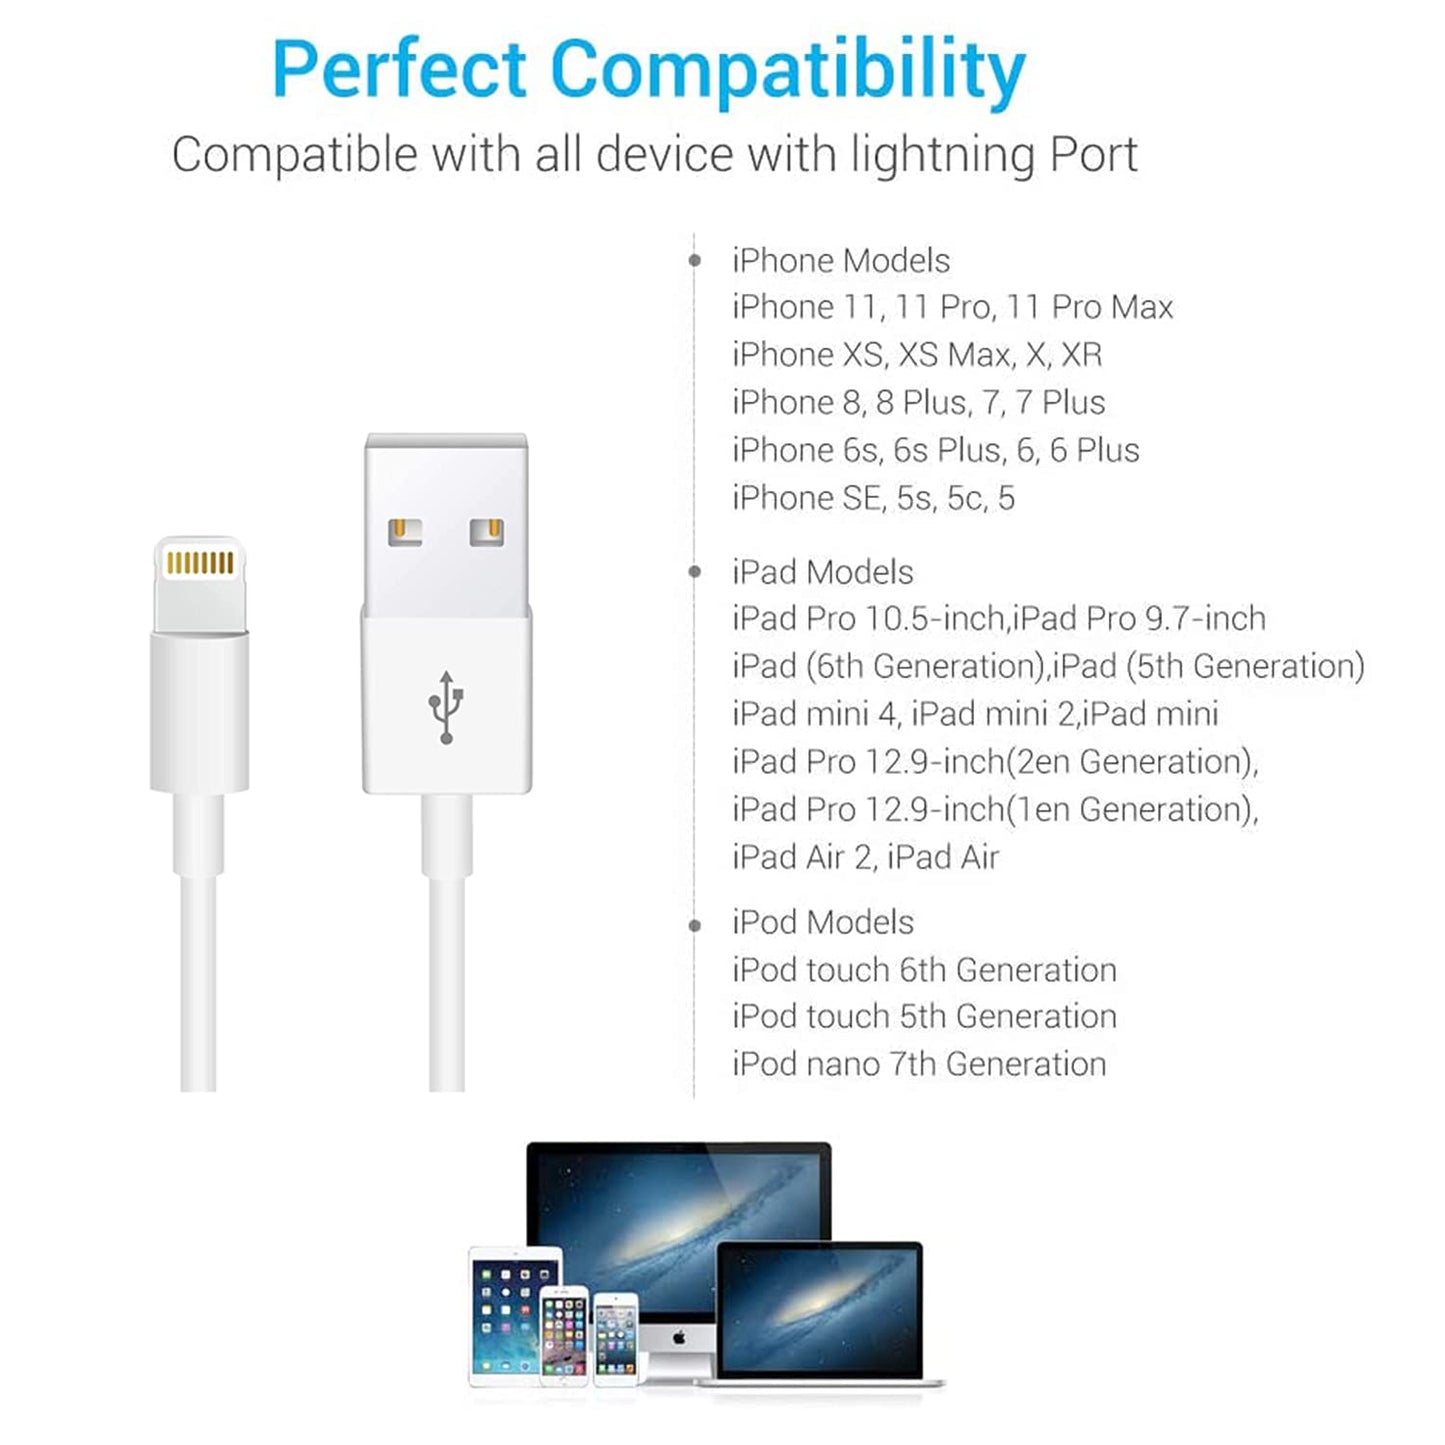 Apple Original Charger Cable, Lightning to USB Cable[Apple MFi Certified] Compatible iPhone 11/ X/8/7/6s/6/plus/5s/5c/SE,iPad Pro/Air/Mini,iPod Touch(White 1M/3.3FT) Original Certified